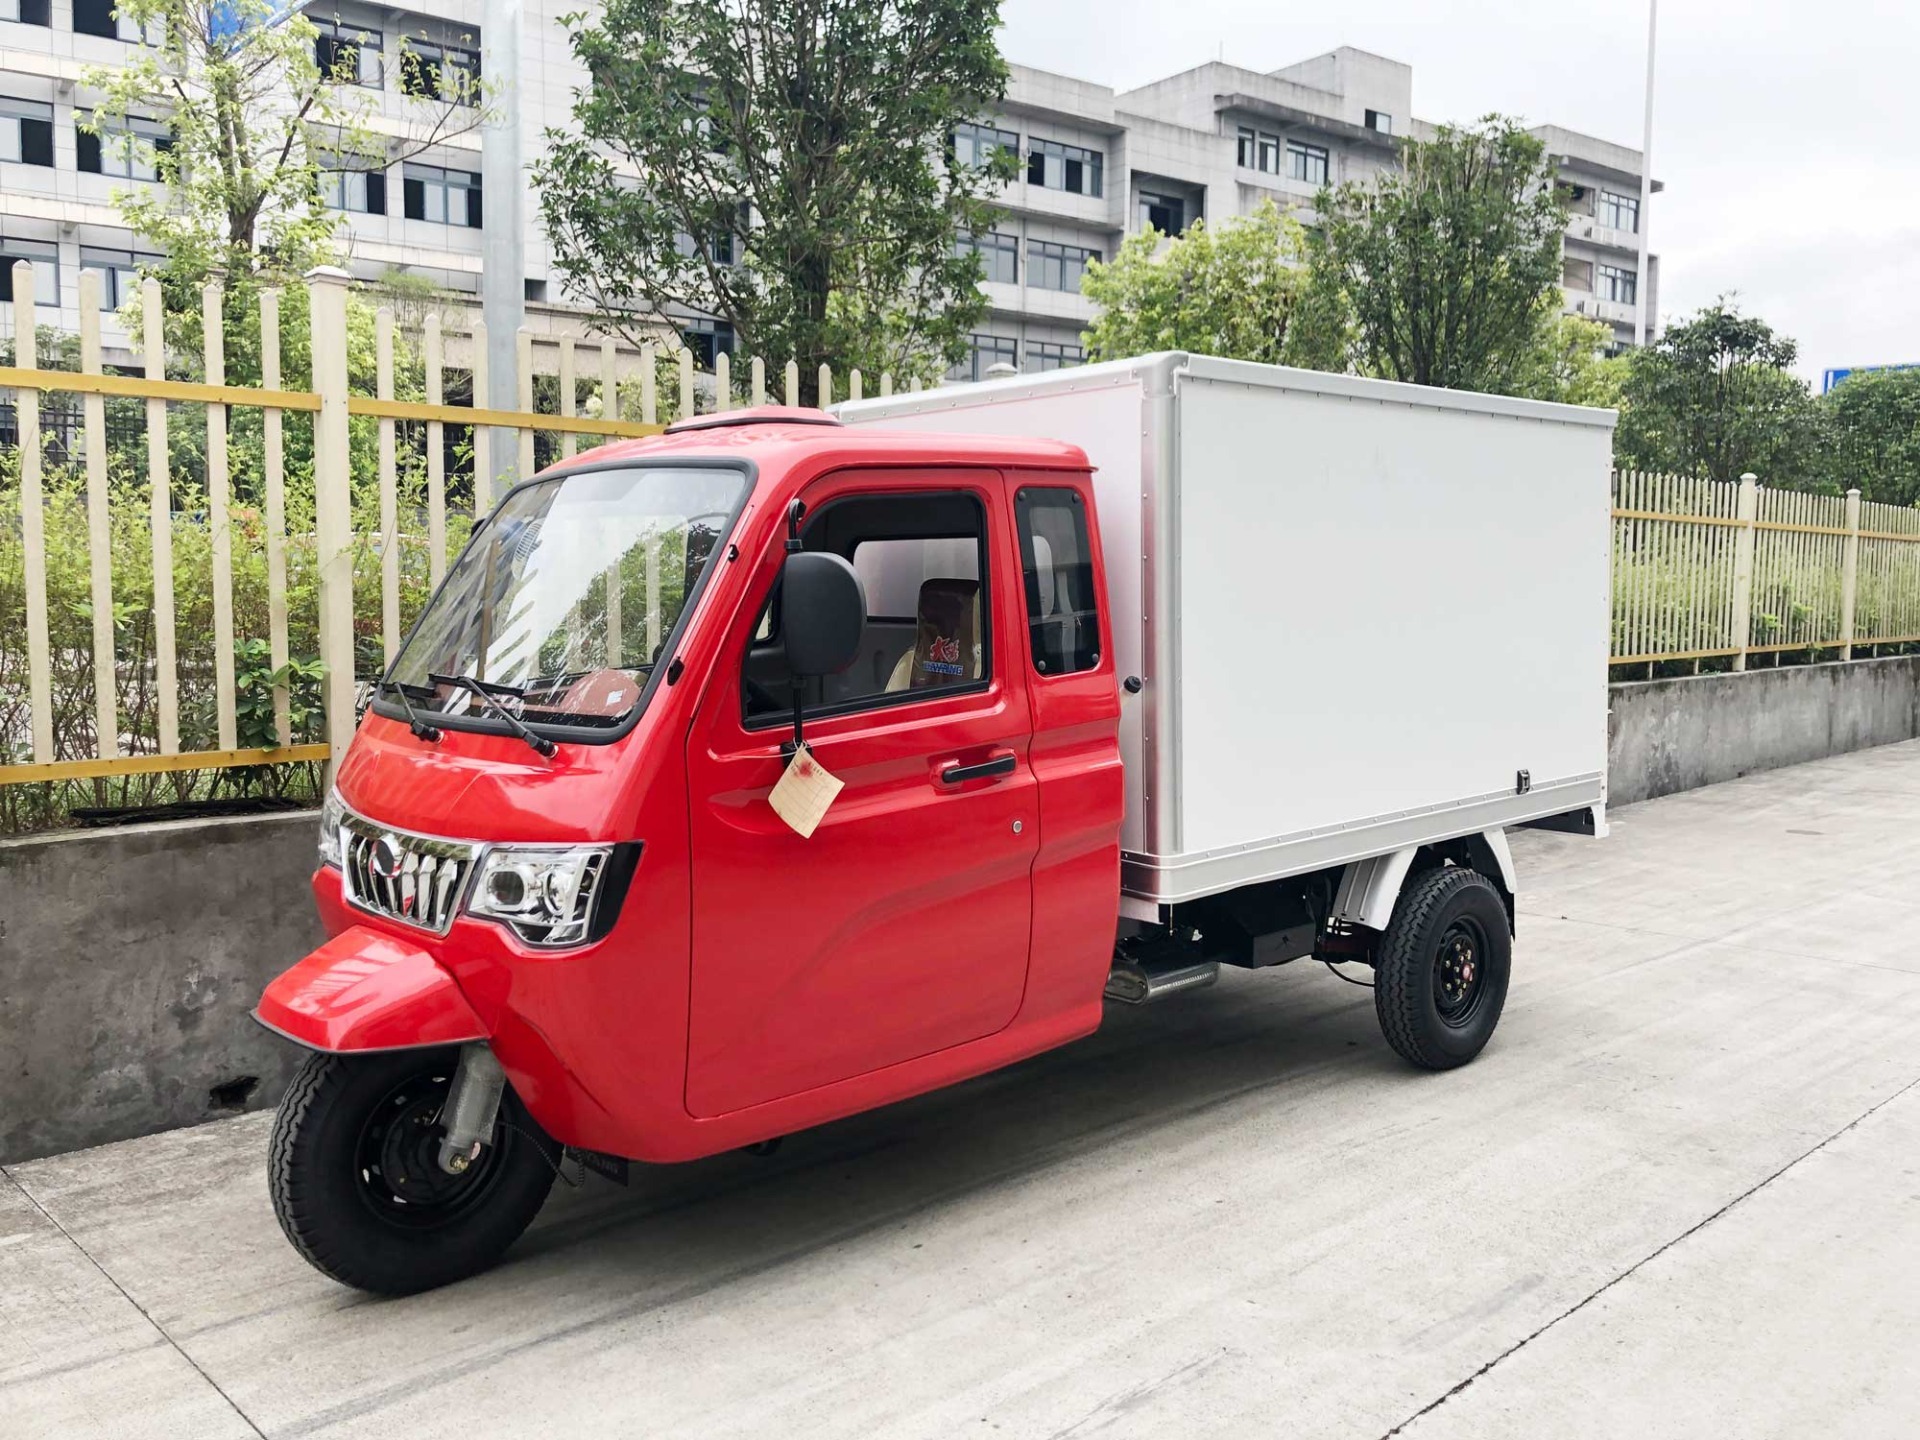 Express delivery tricycle will be subject to national mandatory standards